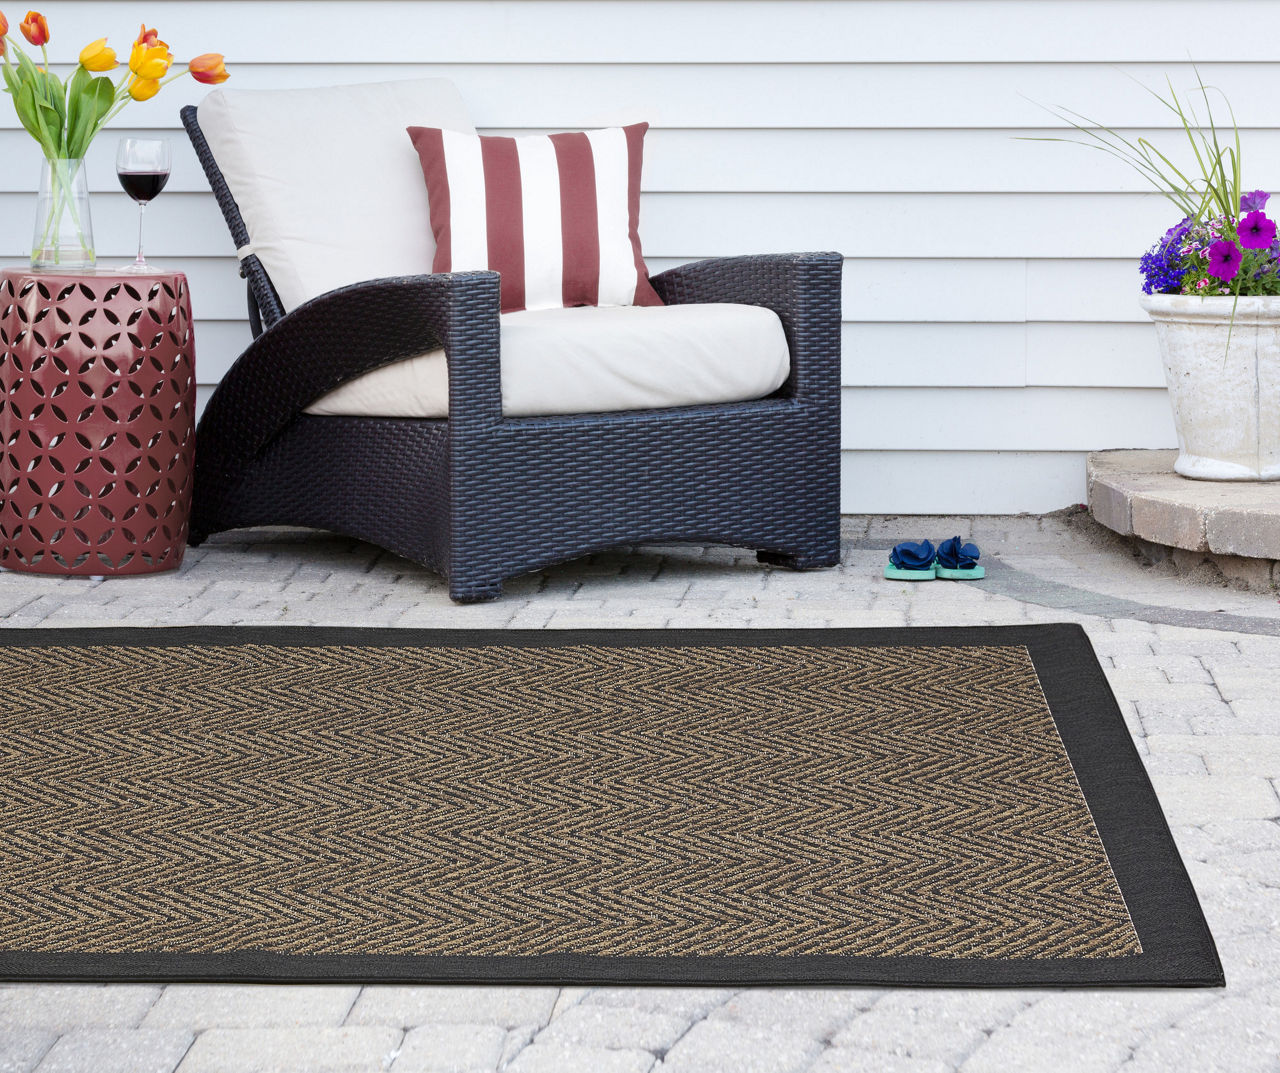 RUGS AREA RUGS 8x10 OUTDOOR RUGS INDOOR OUTDOOR CARPET KITCHEN LARGE PATIO  RUGS